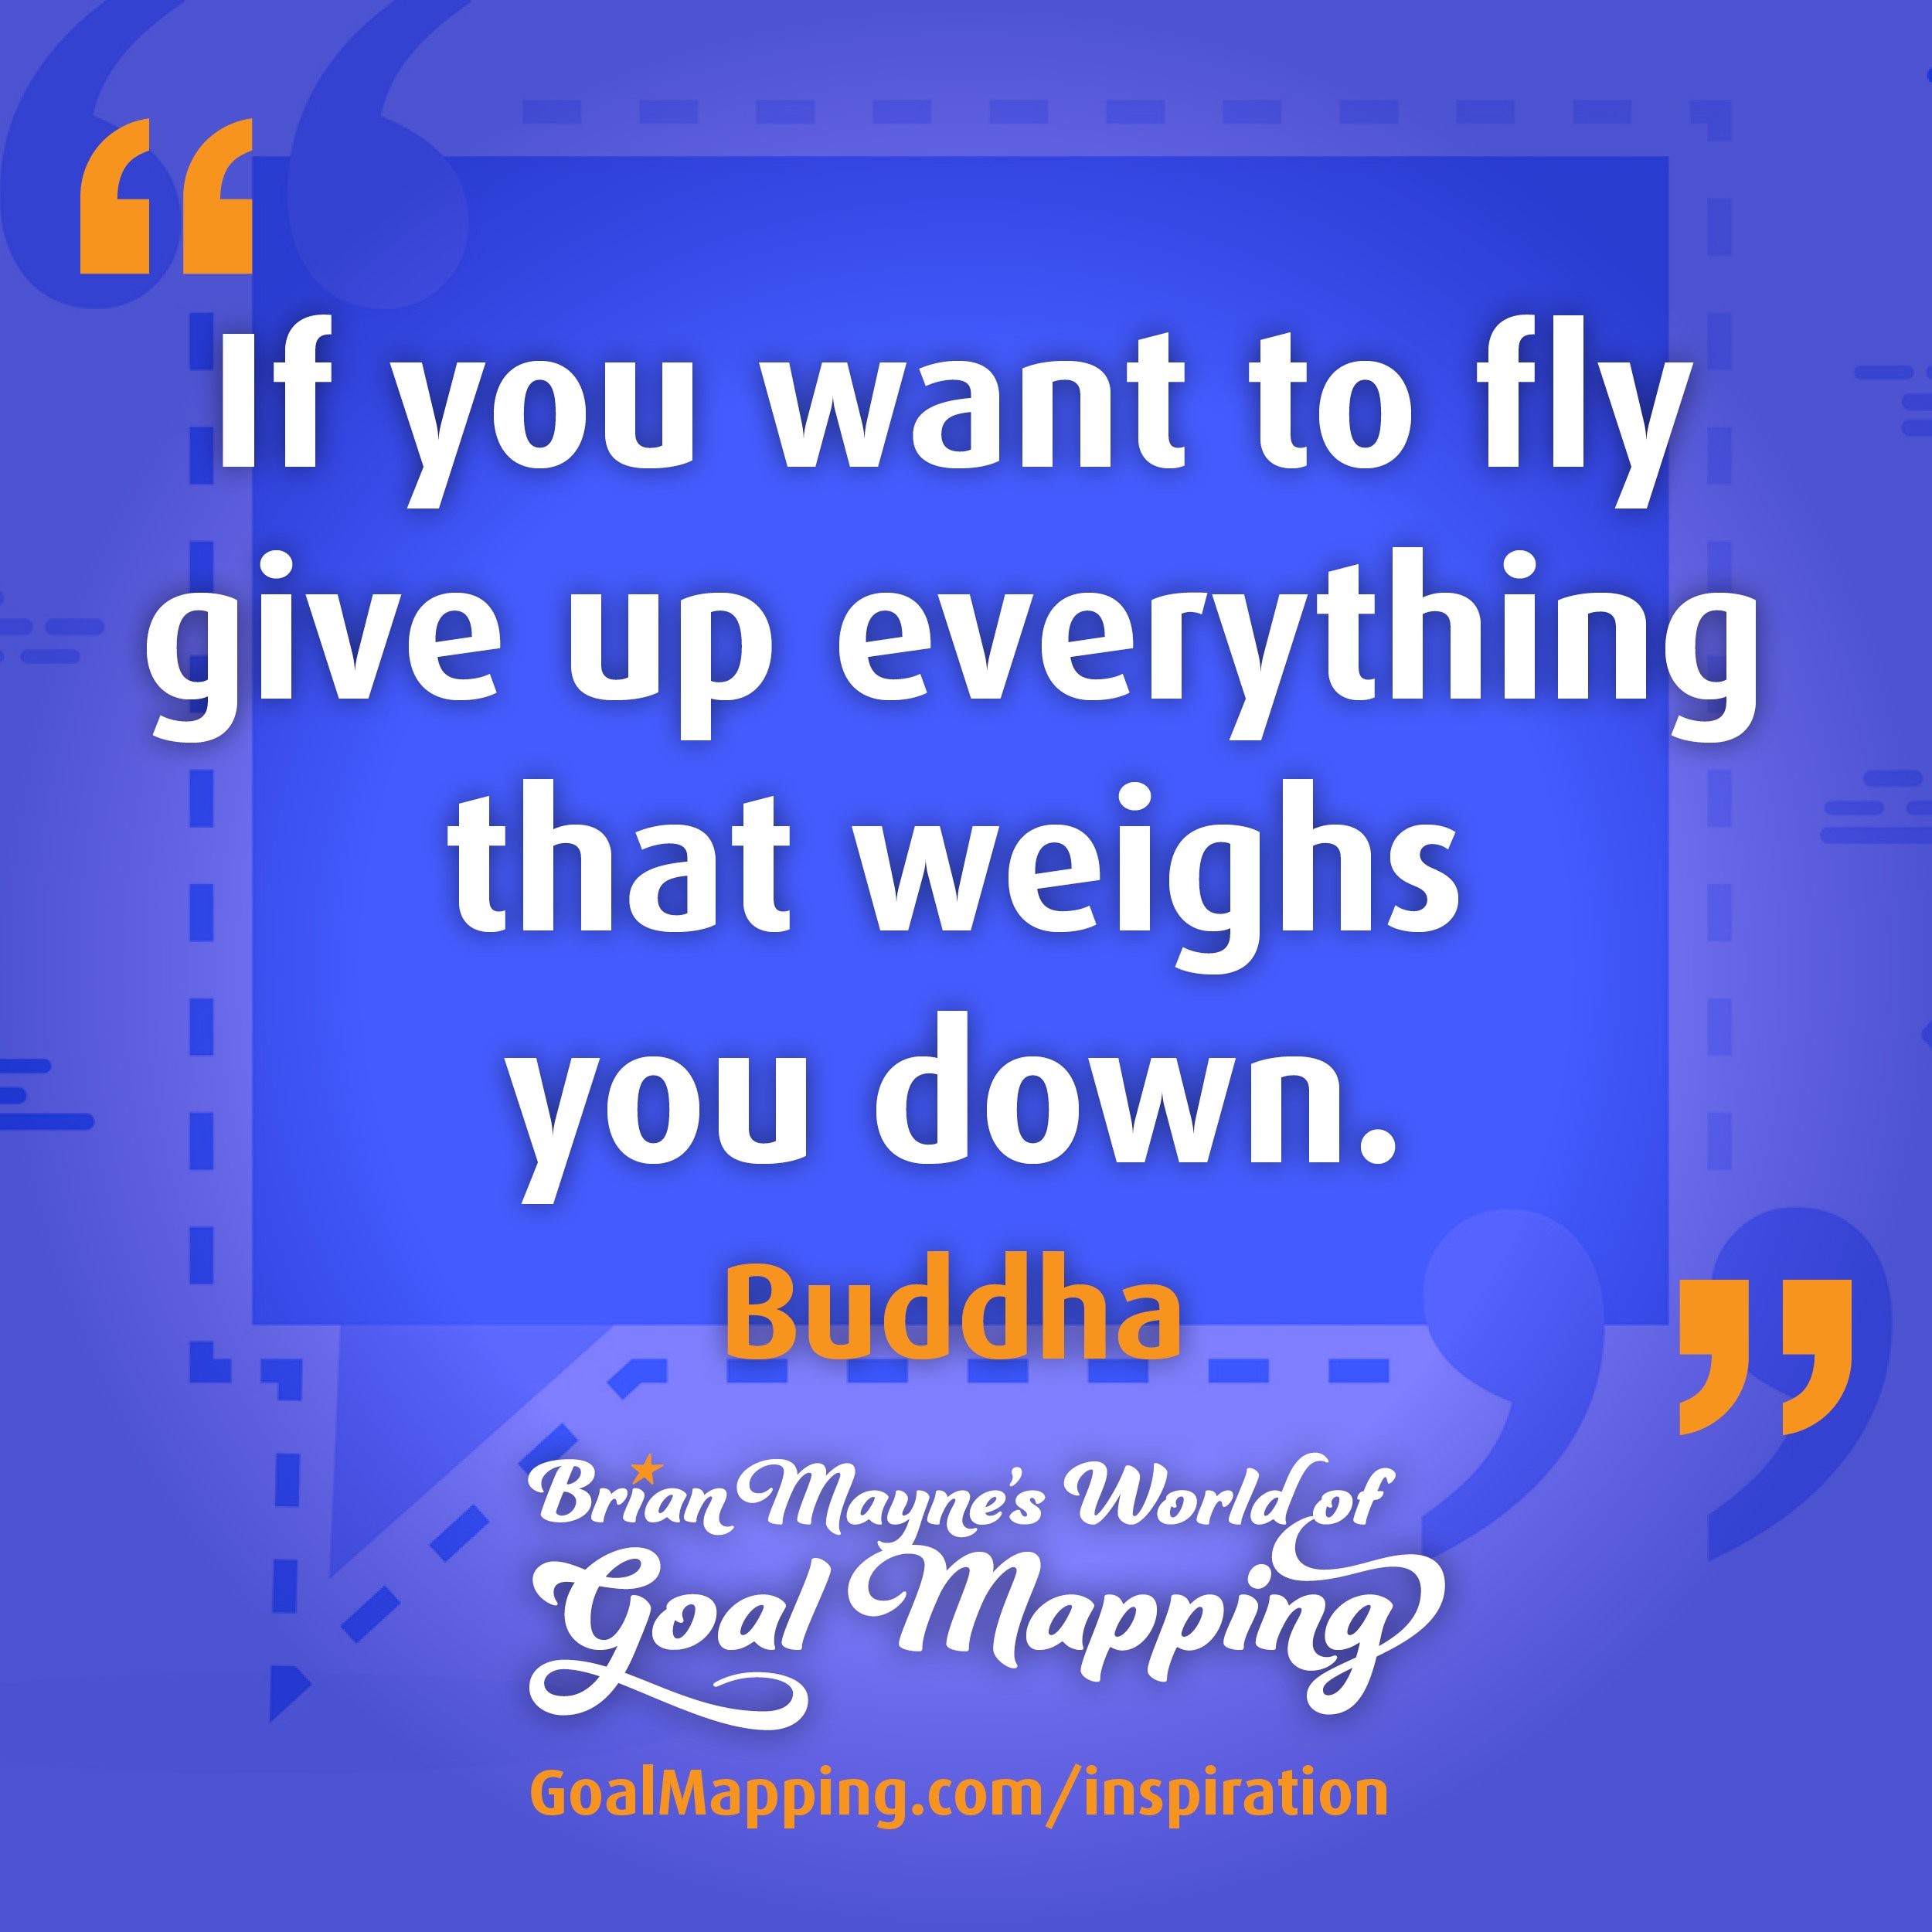 "If you want to fly give up everything that weighs you down." Buddha